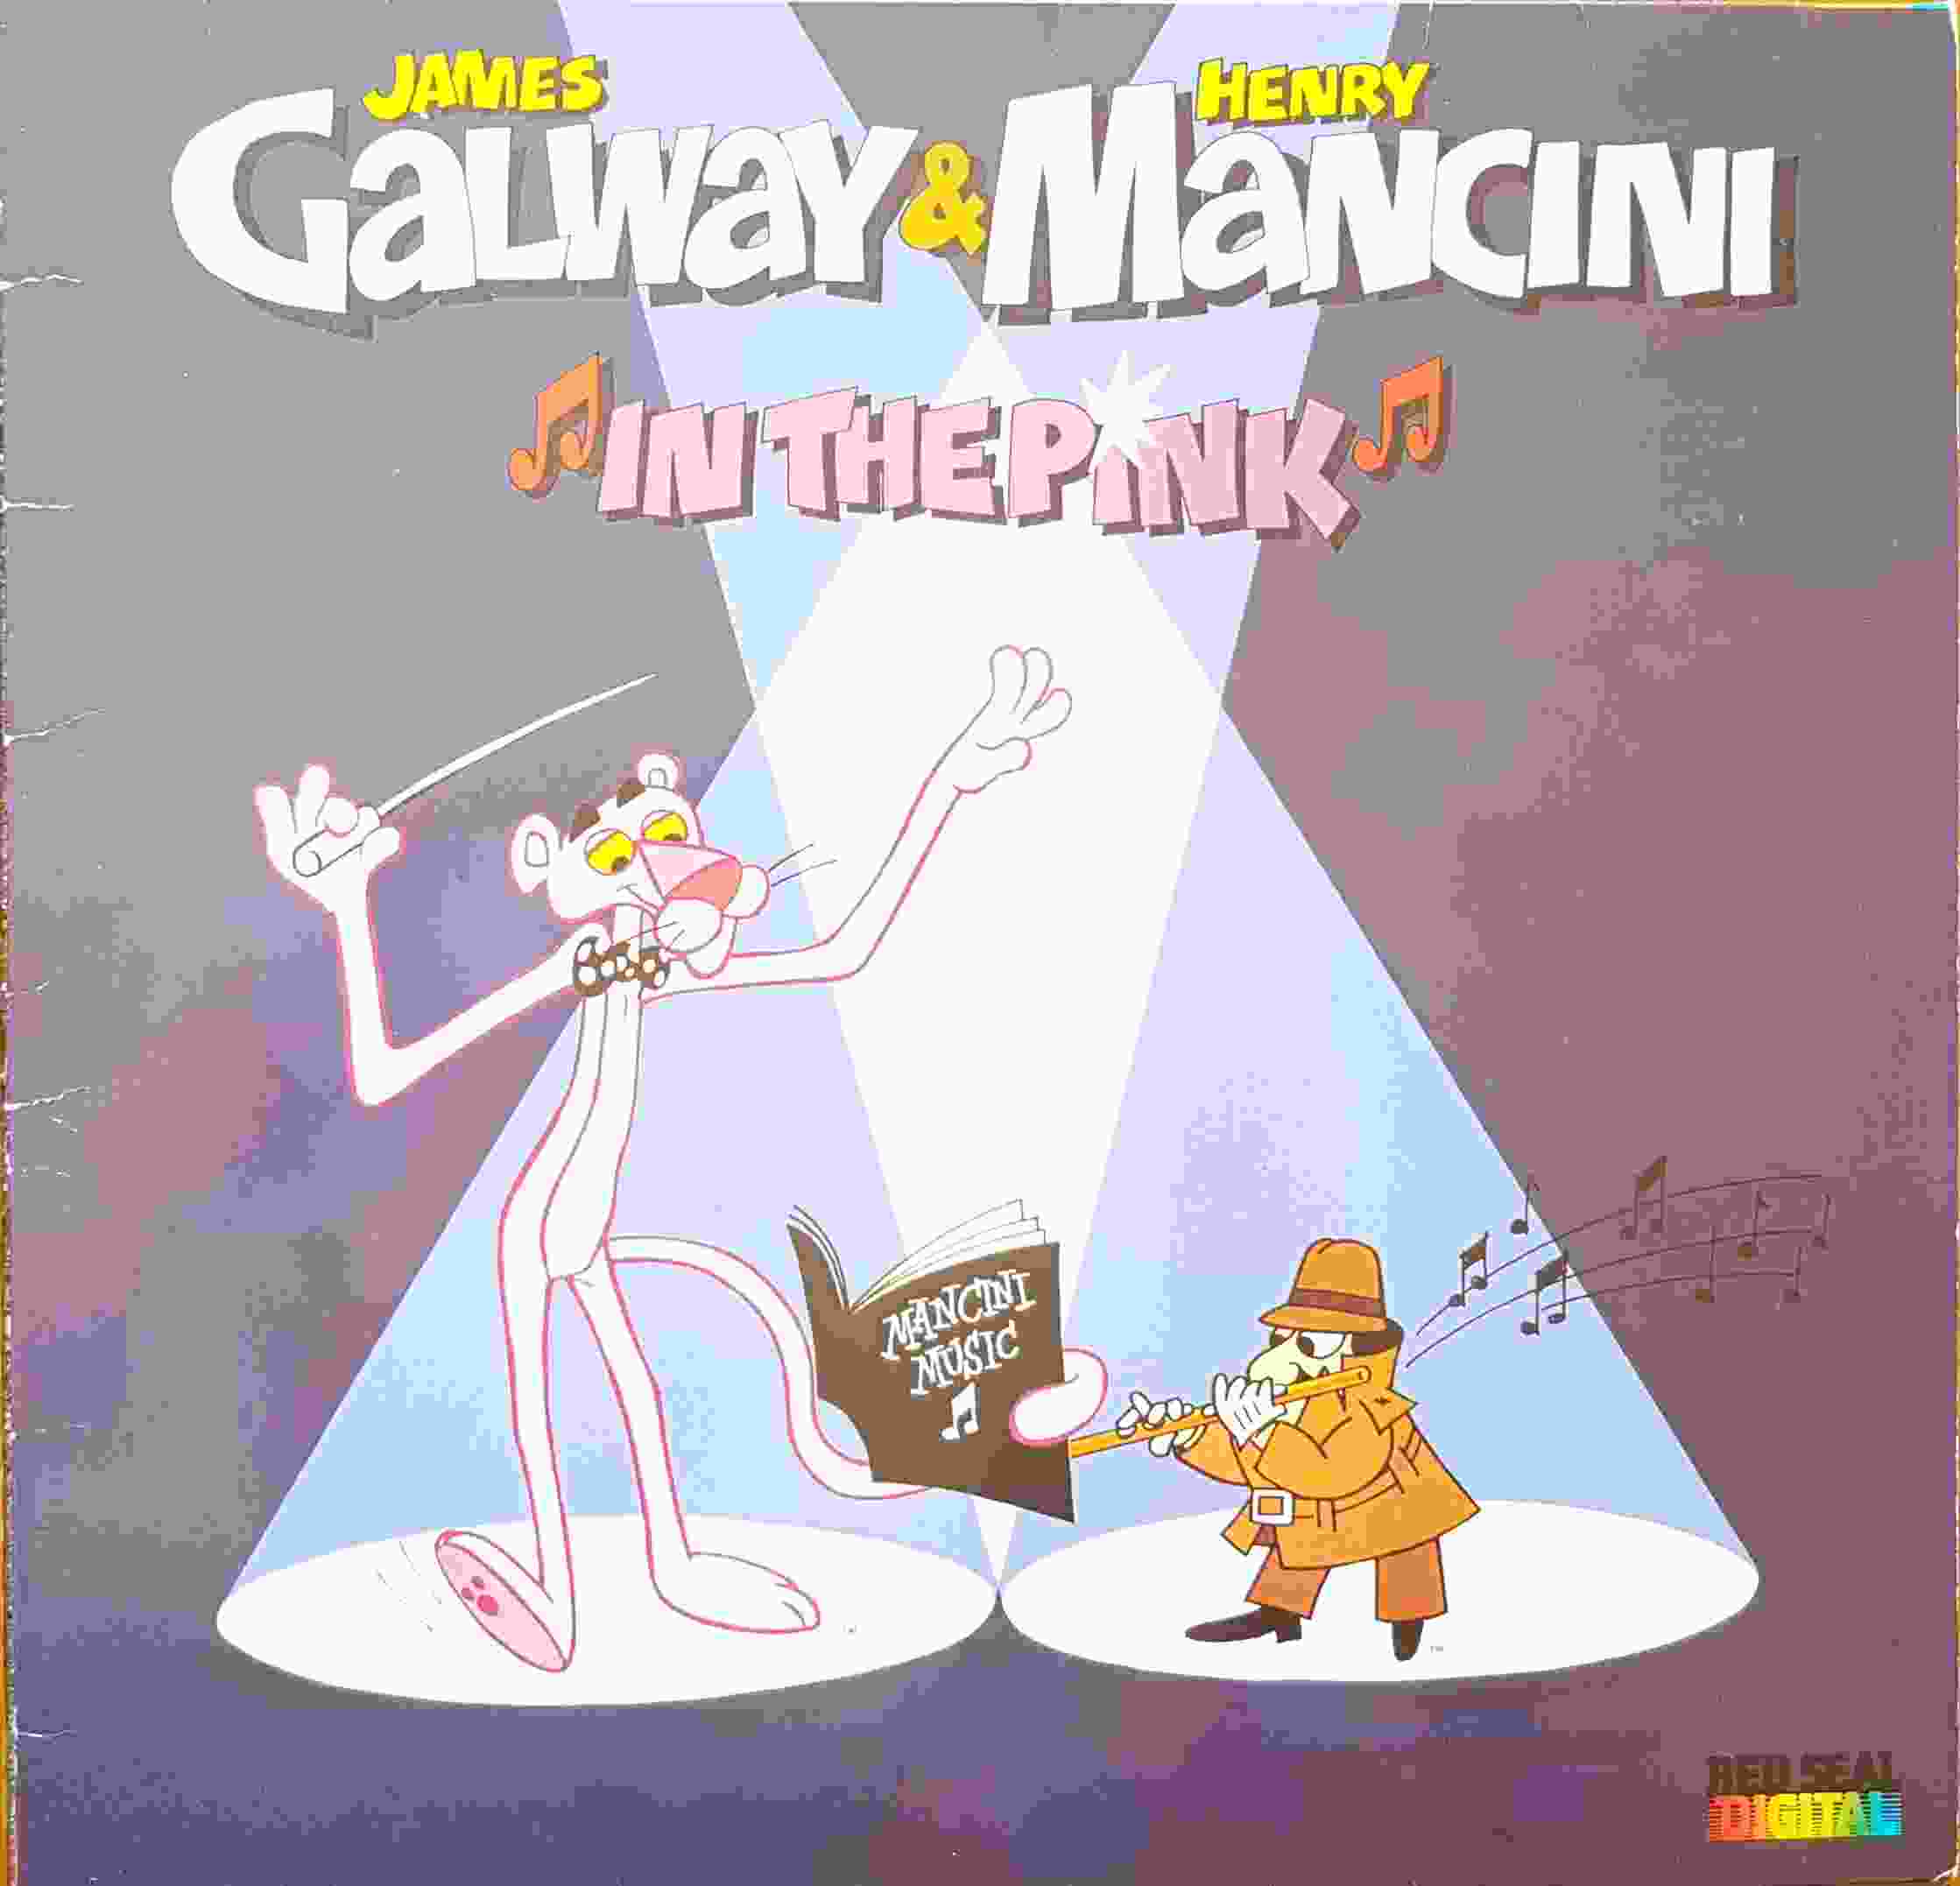 Picture of In the pink by artist Henry Mancini / James Galway from ITV, Channel 4 and Channel 5 albums library